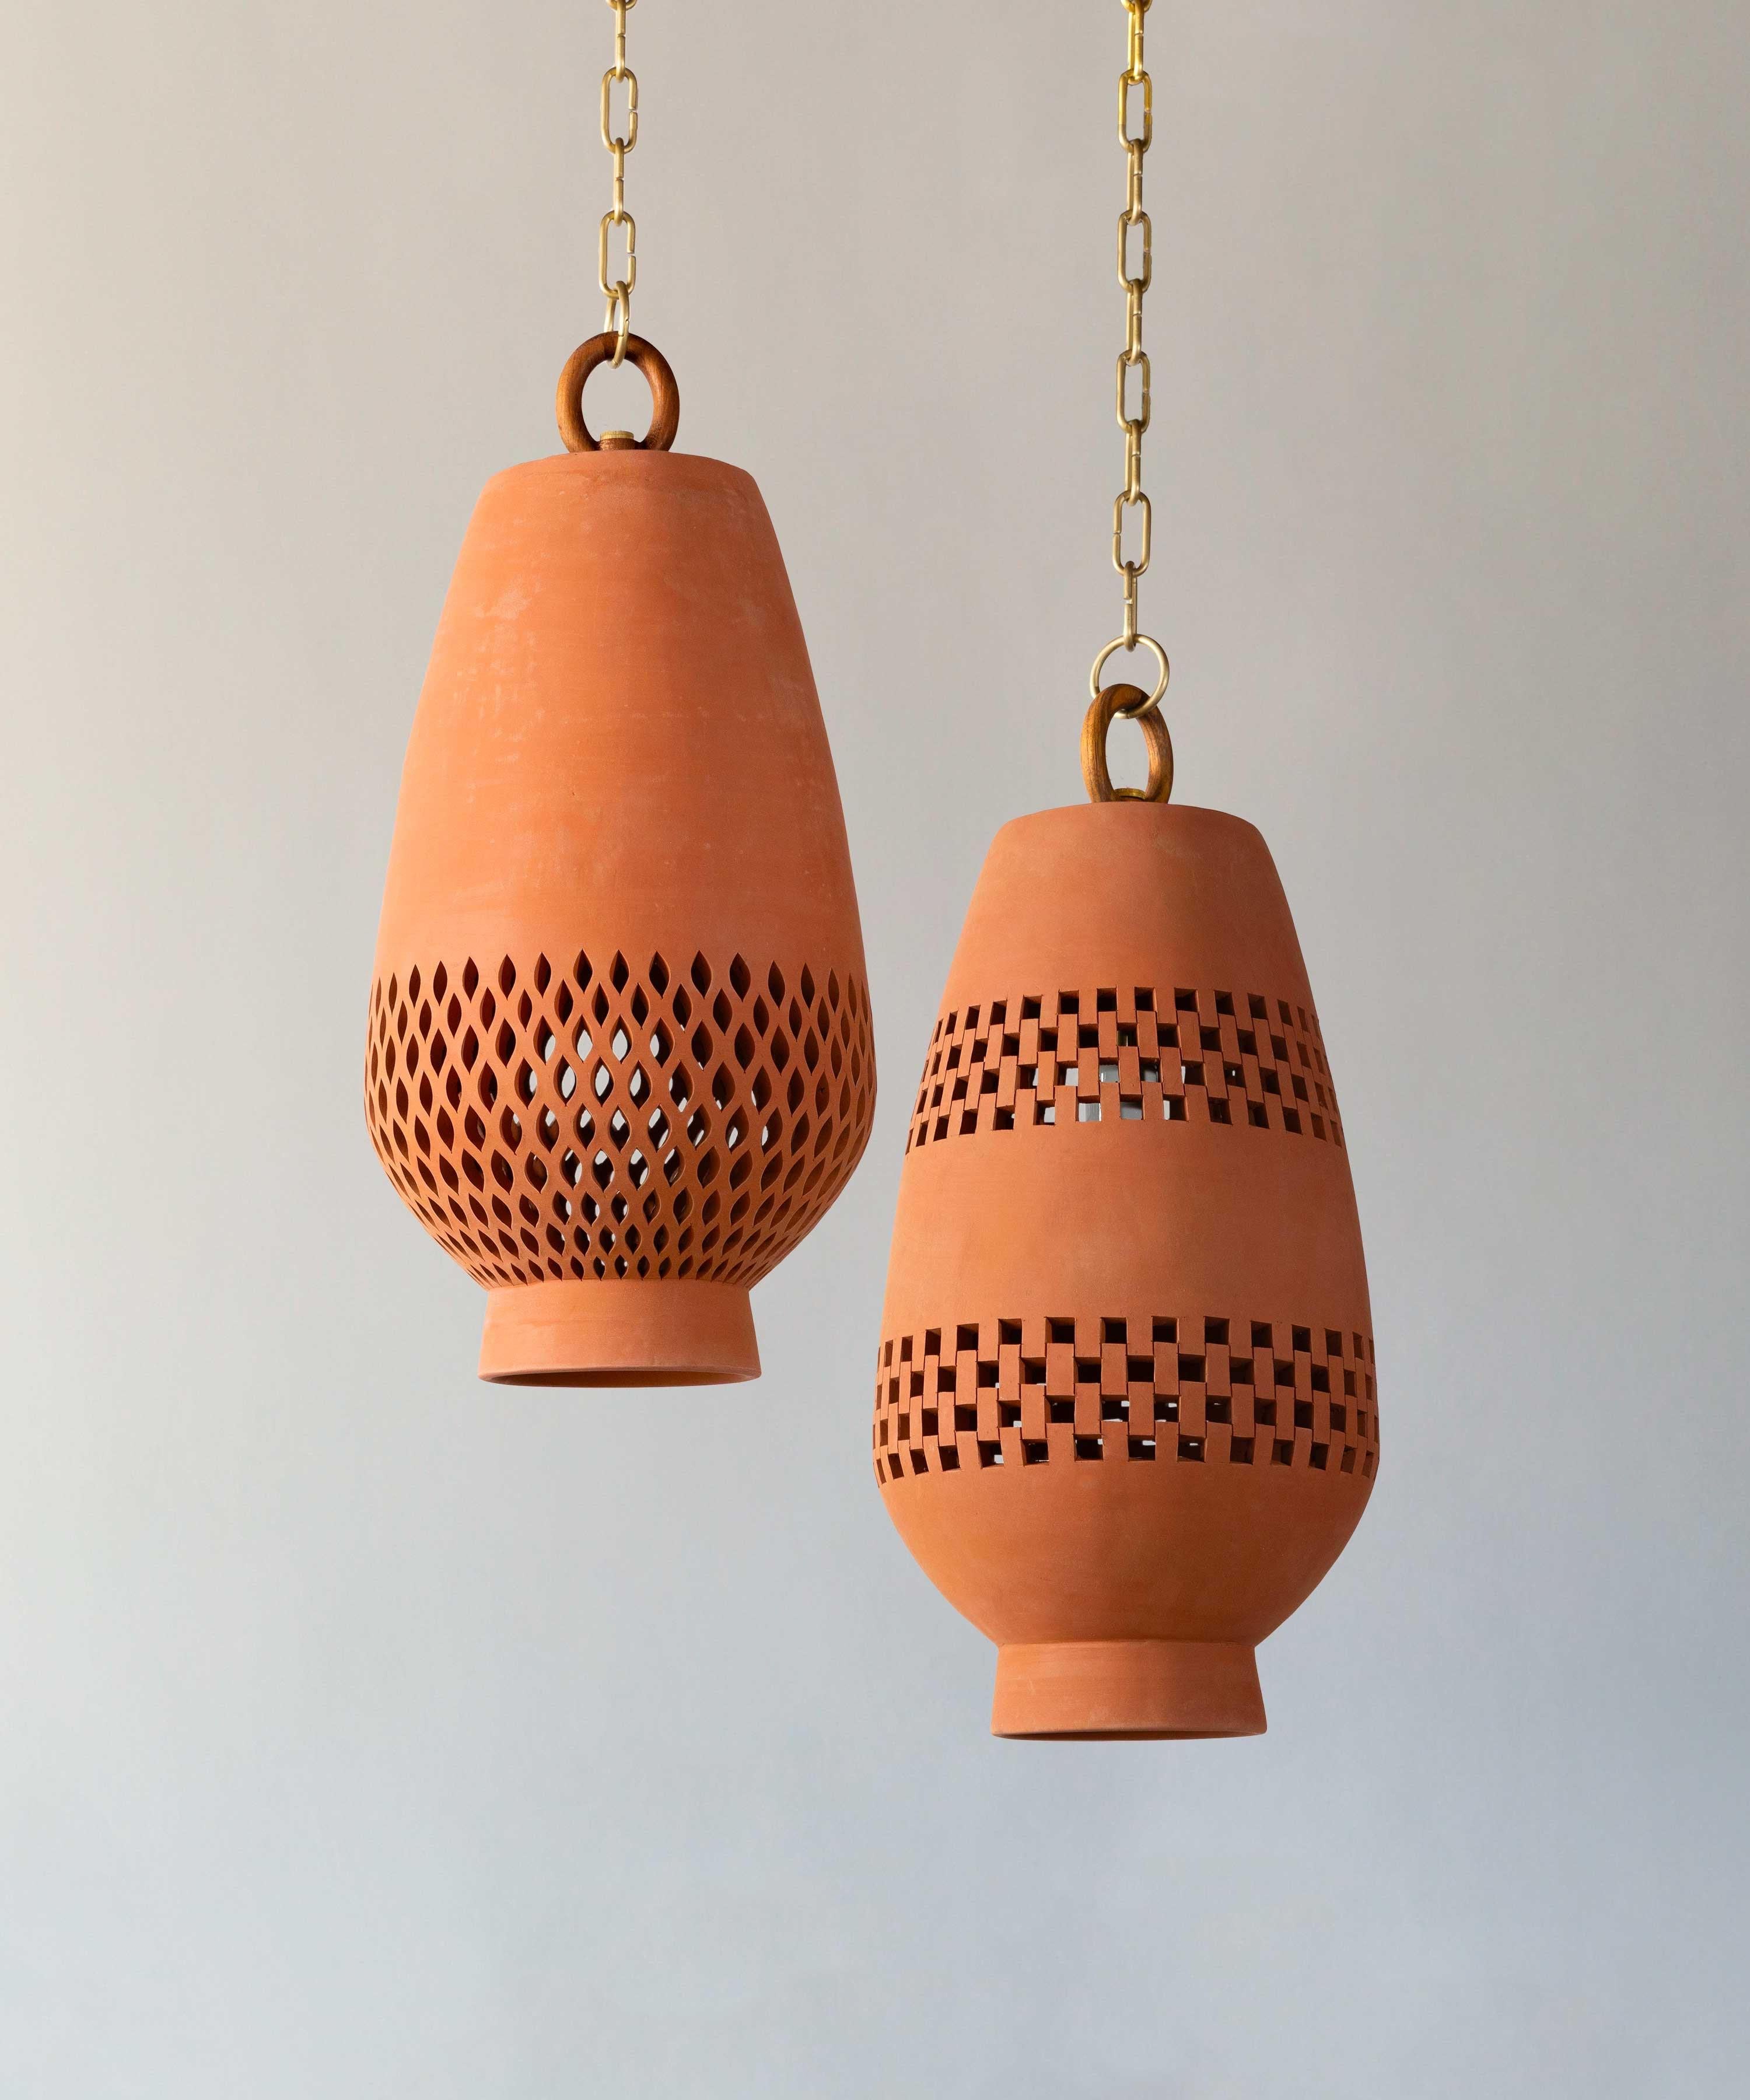 Hand-Crafted Terracotta Ceramic Pendant Light XL, Aged Brass, Diamantes Atzompa Collection For Sale